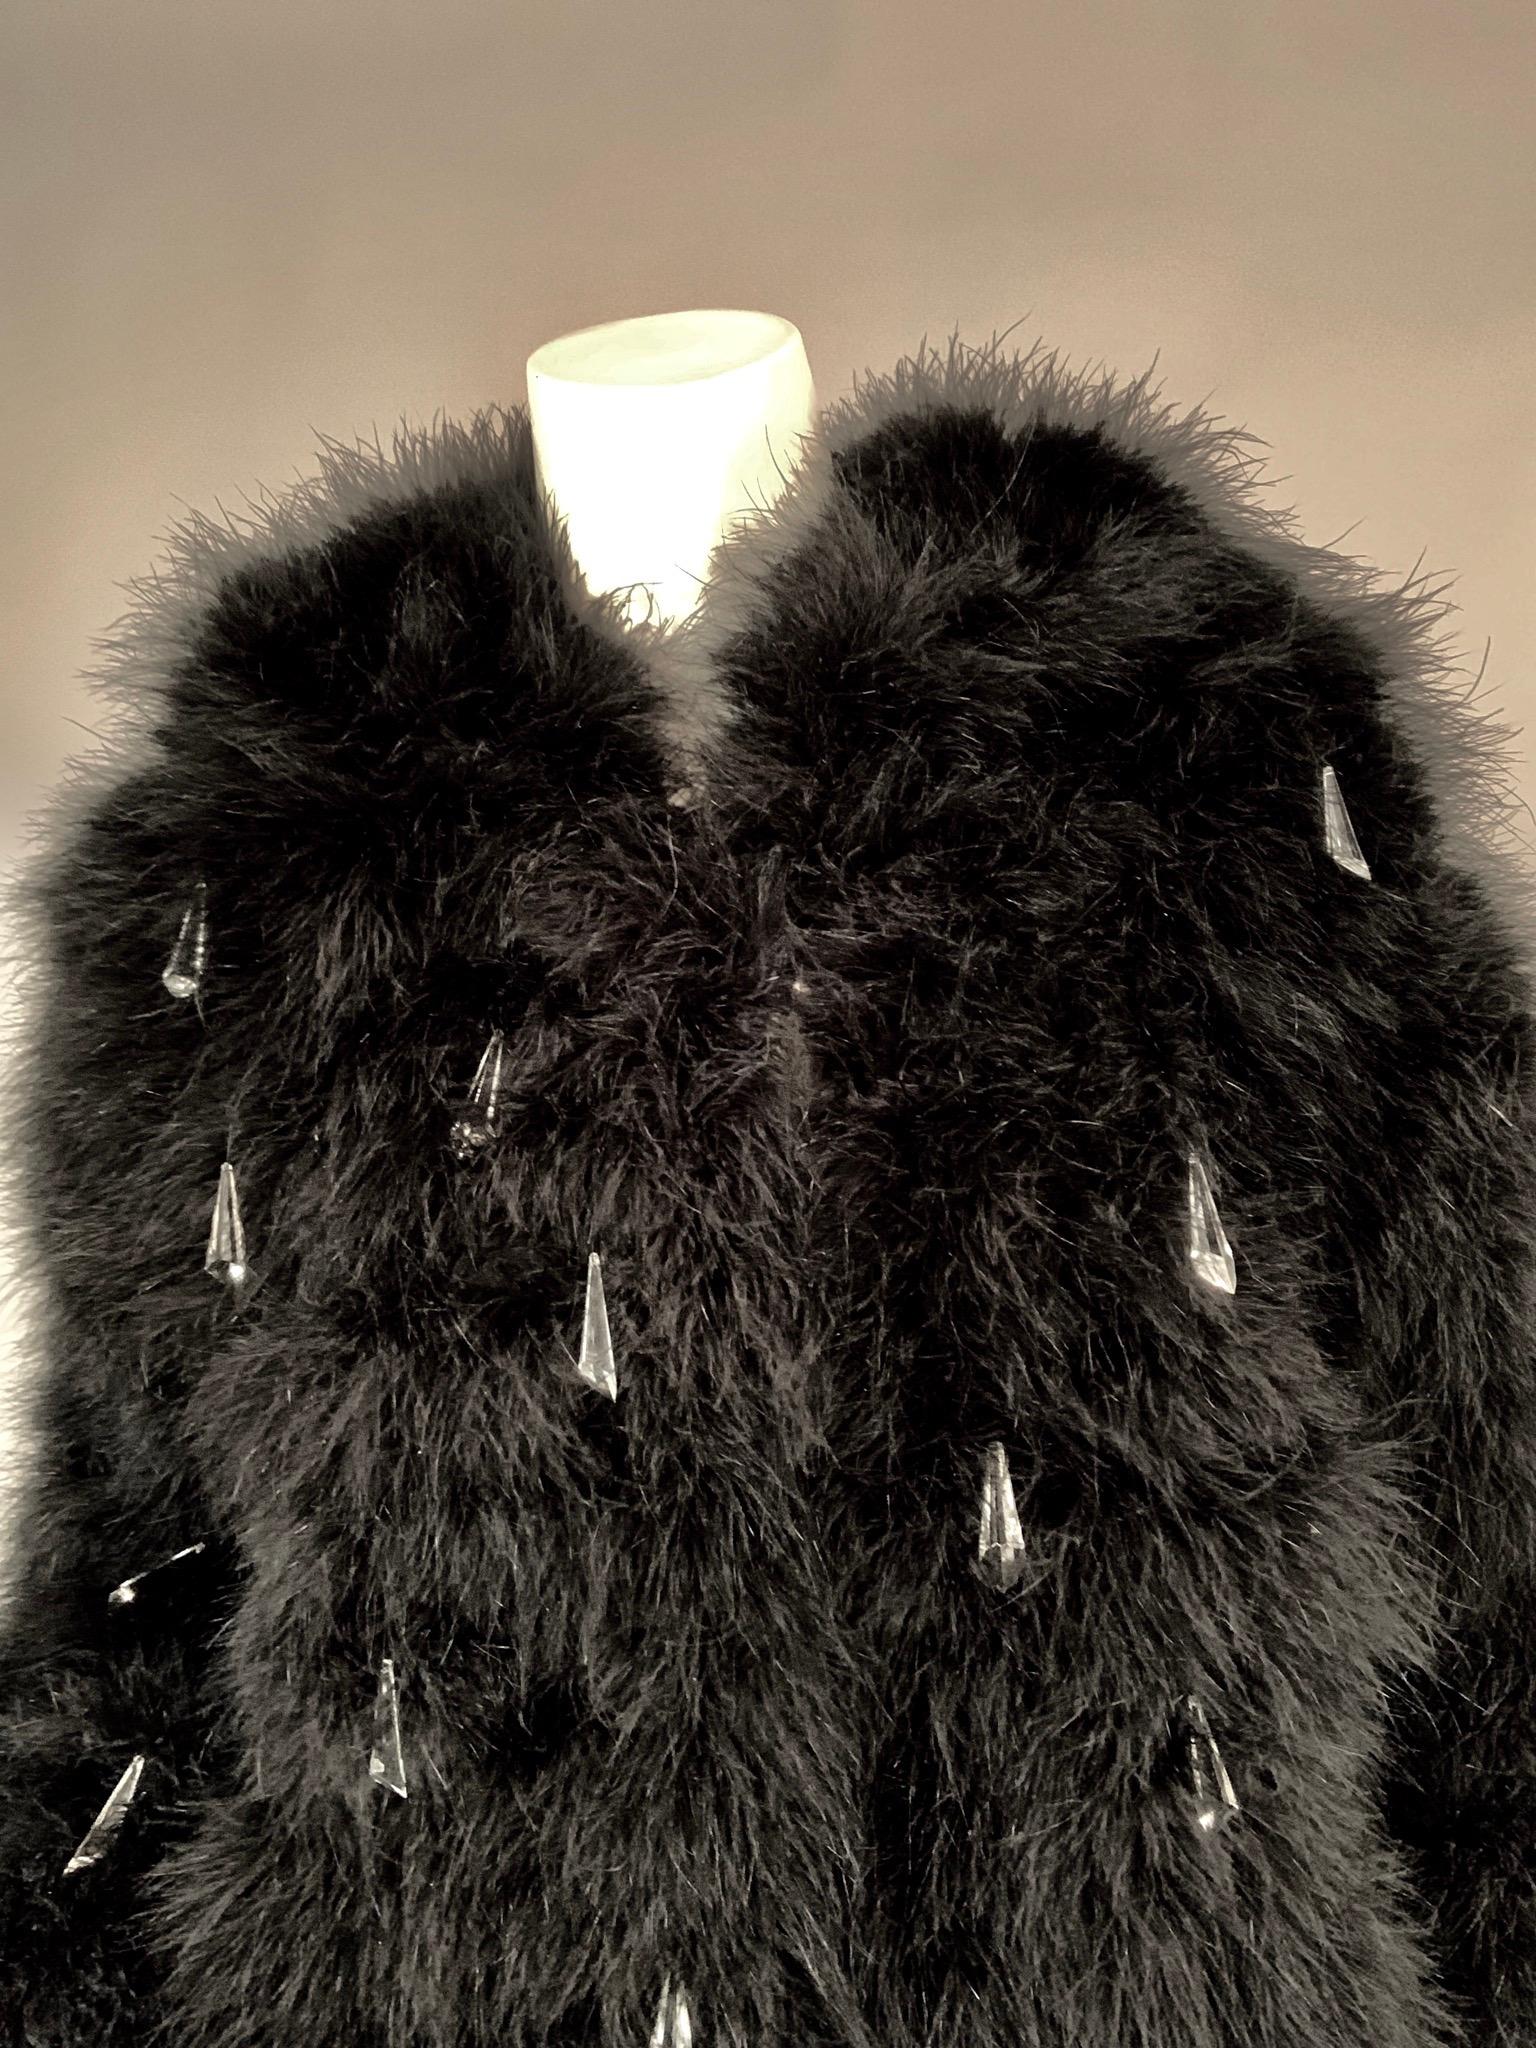 Does this glamorous 1970's feather coat from YSL tickle your fancy? It is made from black marabou feathers with a rounded collar, two fur hooks for closure at the center front and sparkling plastic prisms dangling and catching the light with your